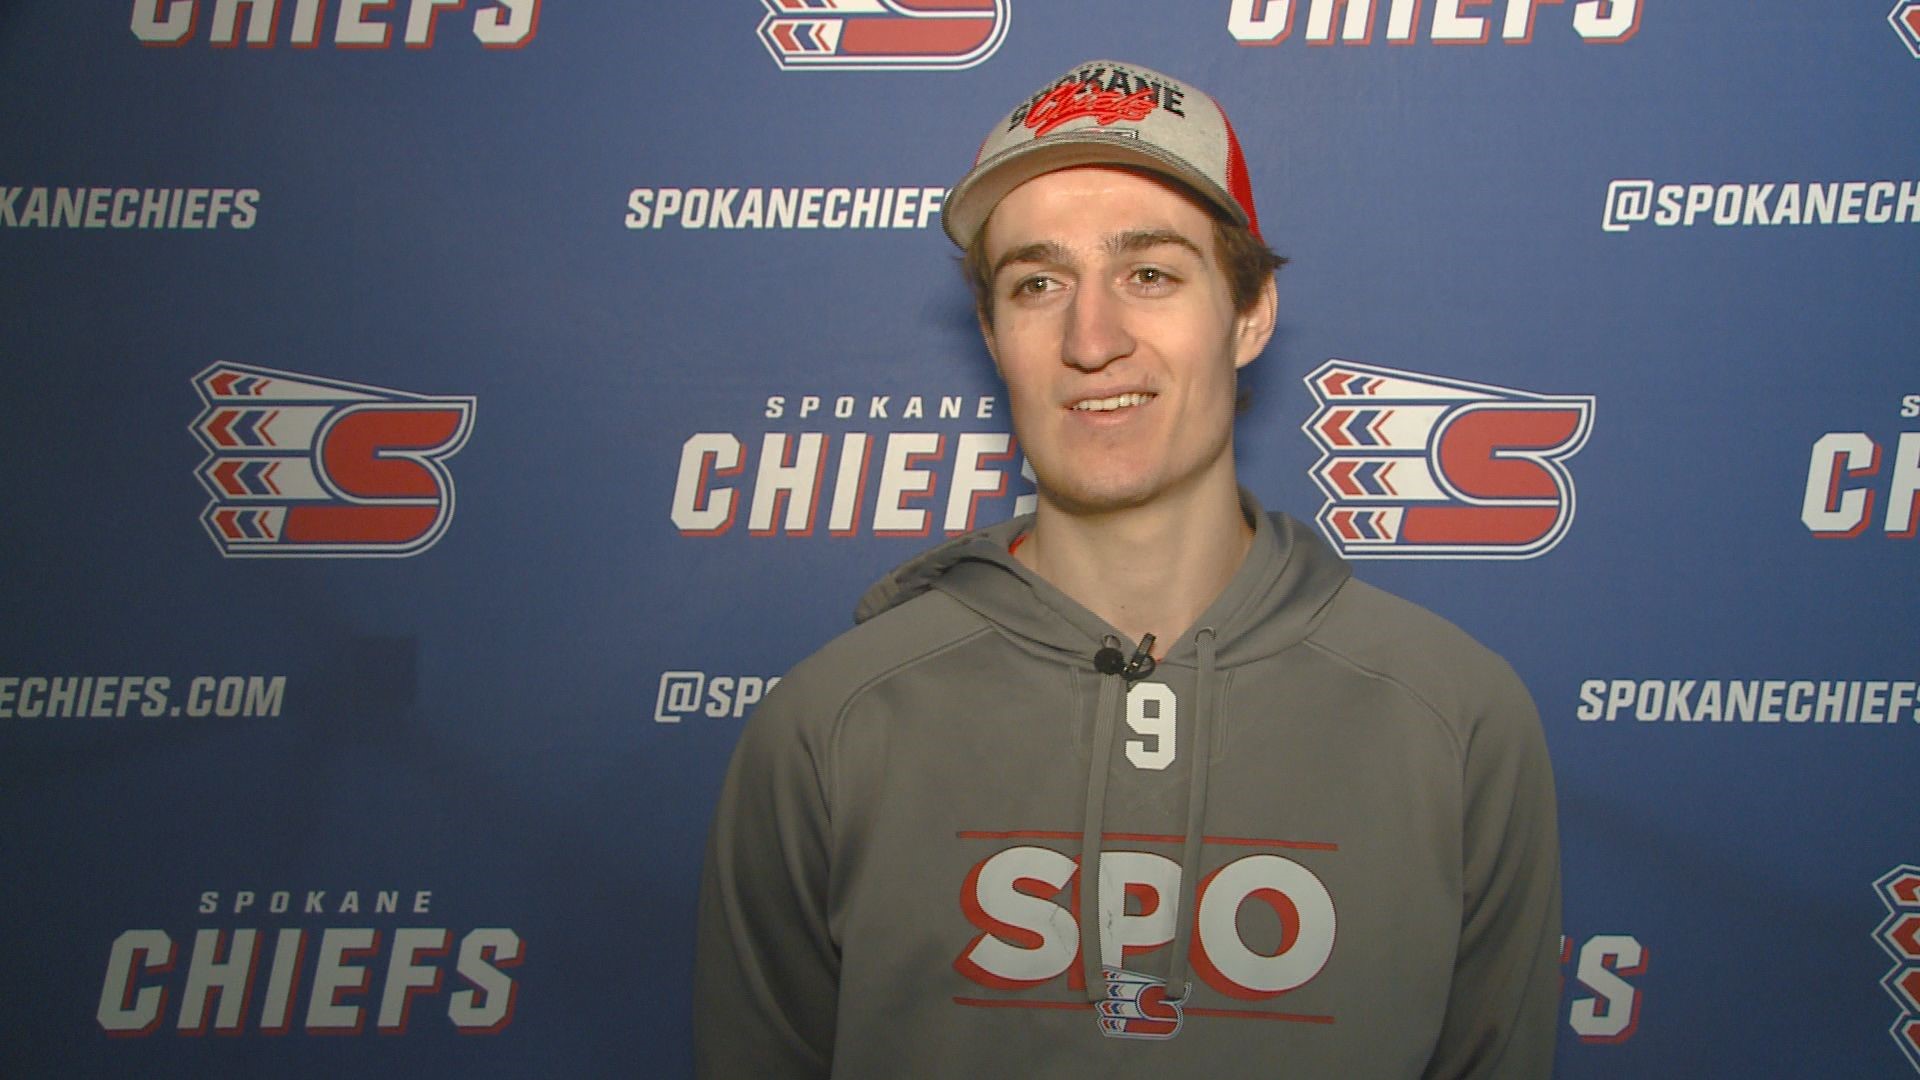 Hughes helped propel his team to the playoffs this year after the Chiefs midway through the year were last place in the WHL Western Conference.